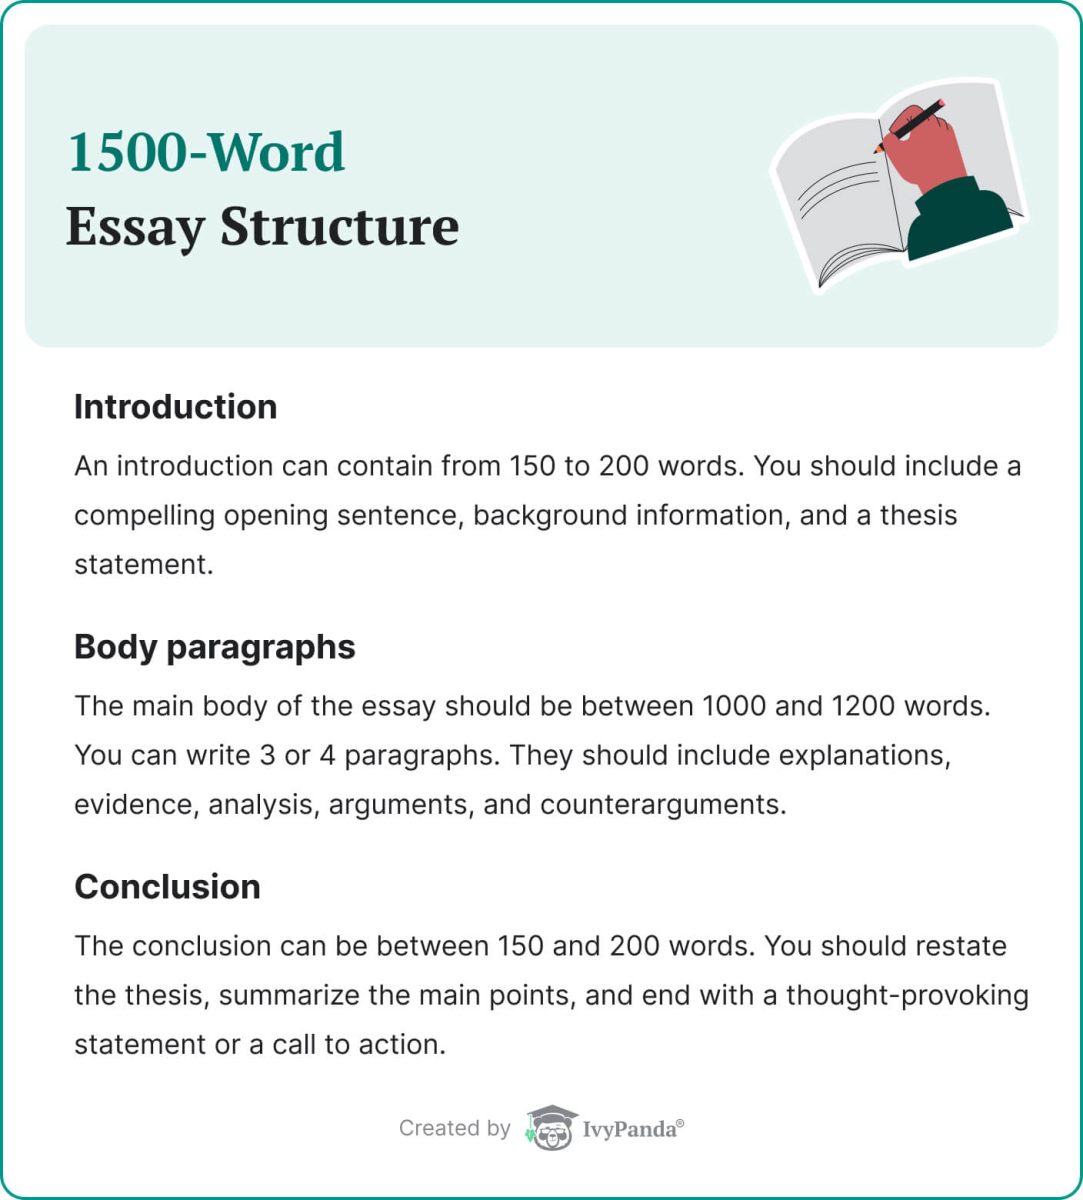 The picture describes a 1500-word essay structure.